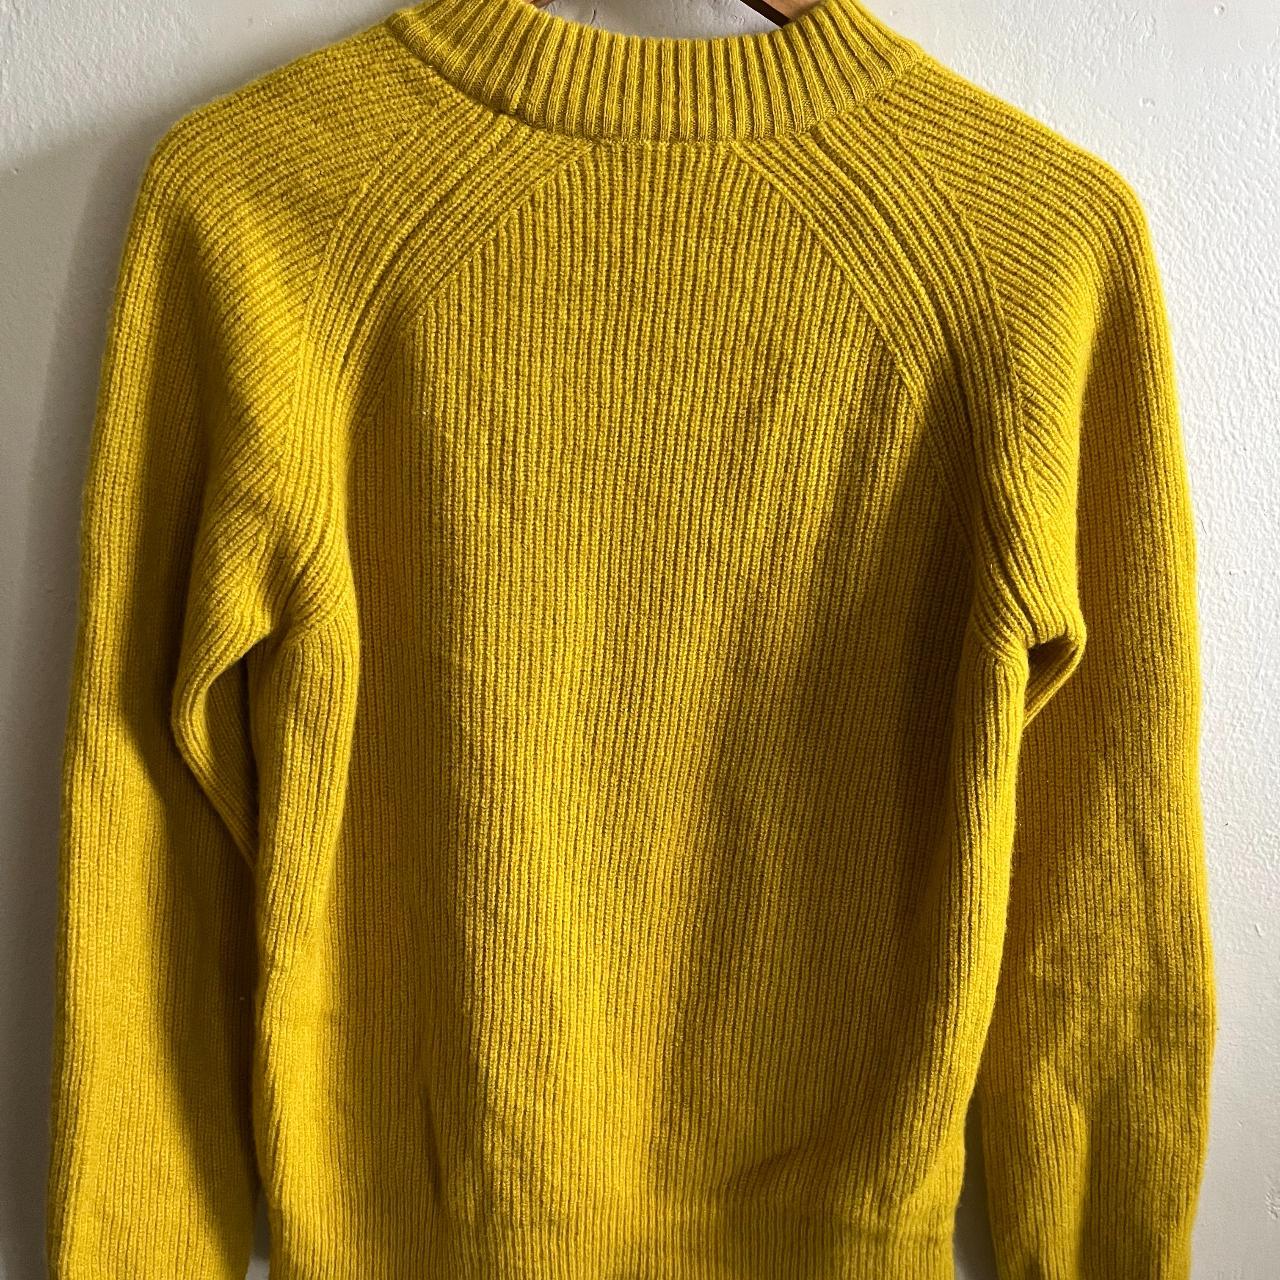 Norse Projects 100% Lambswool Crewneck... - Depop